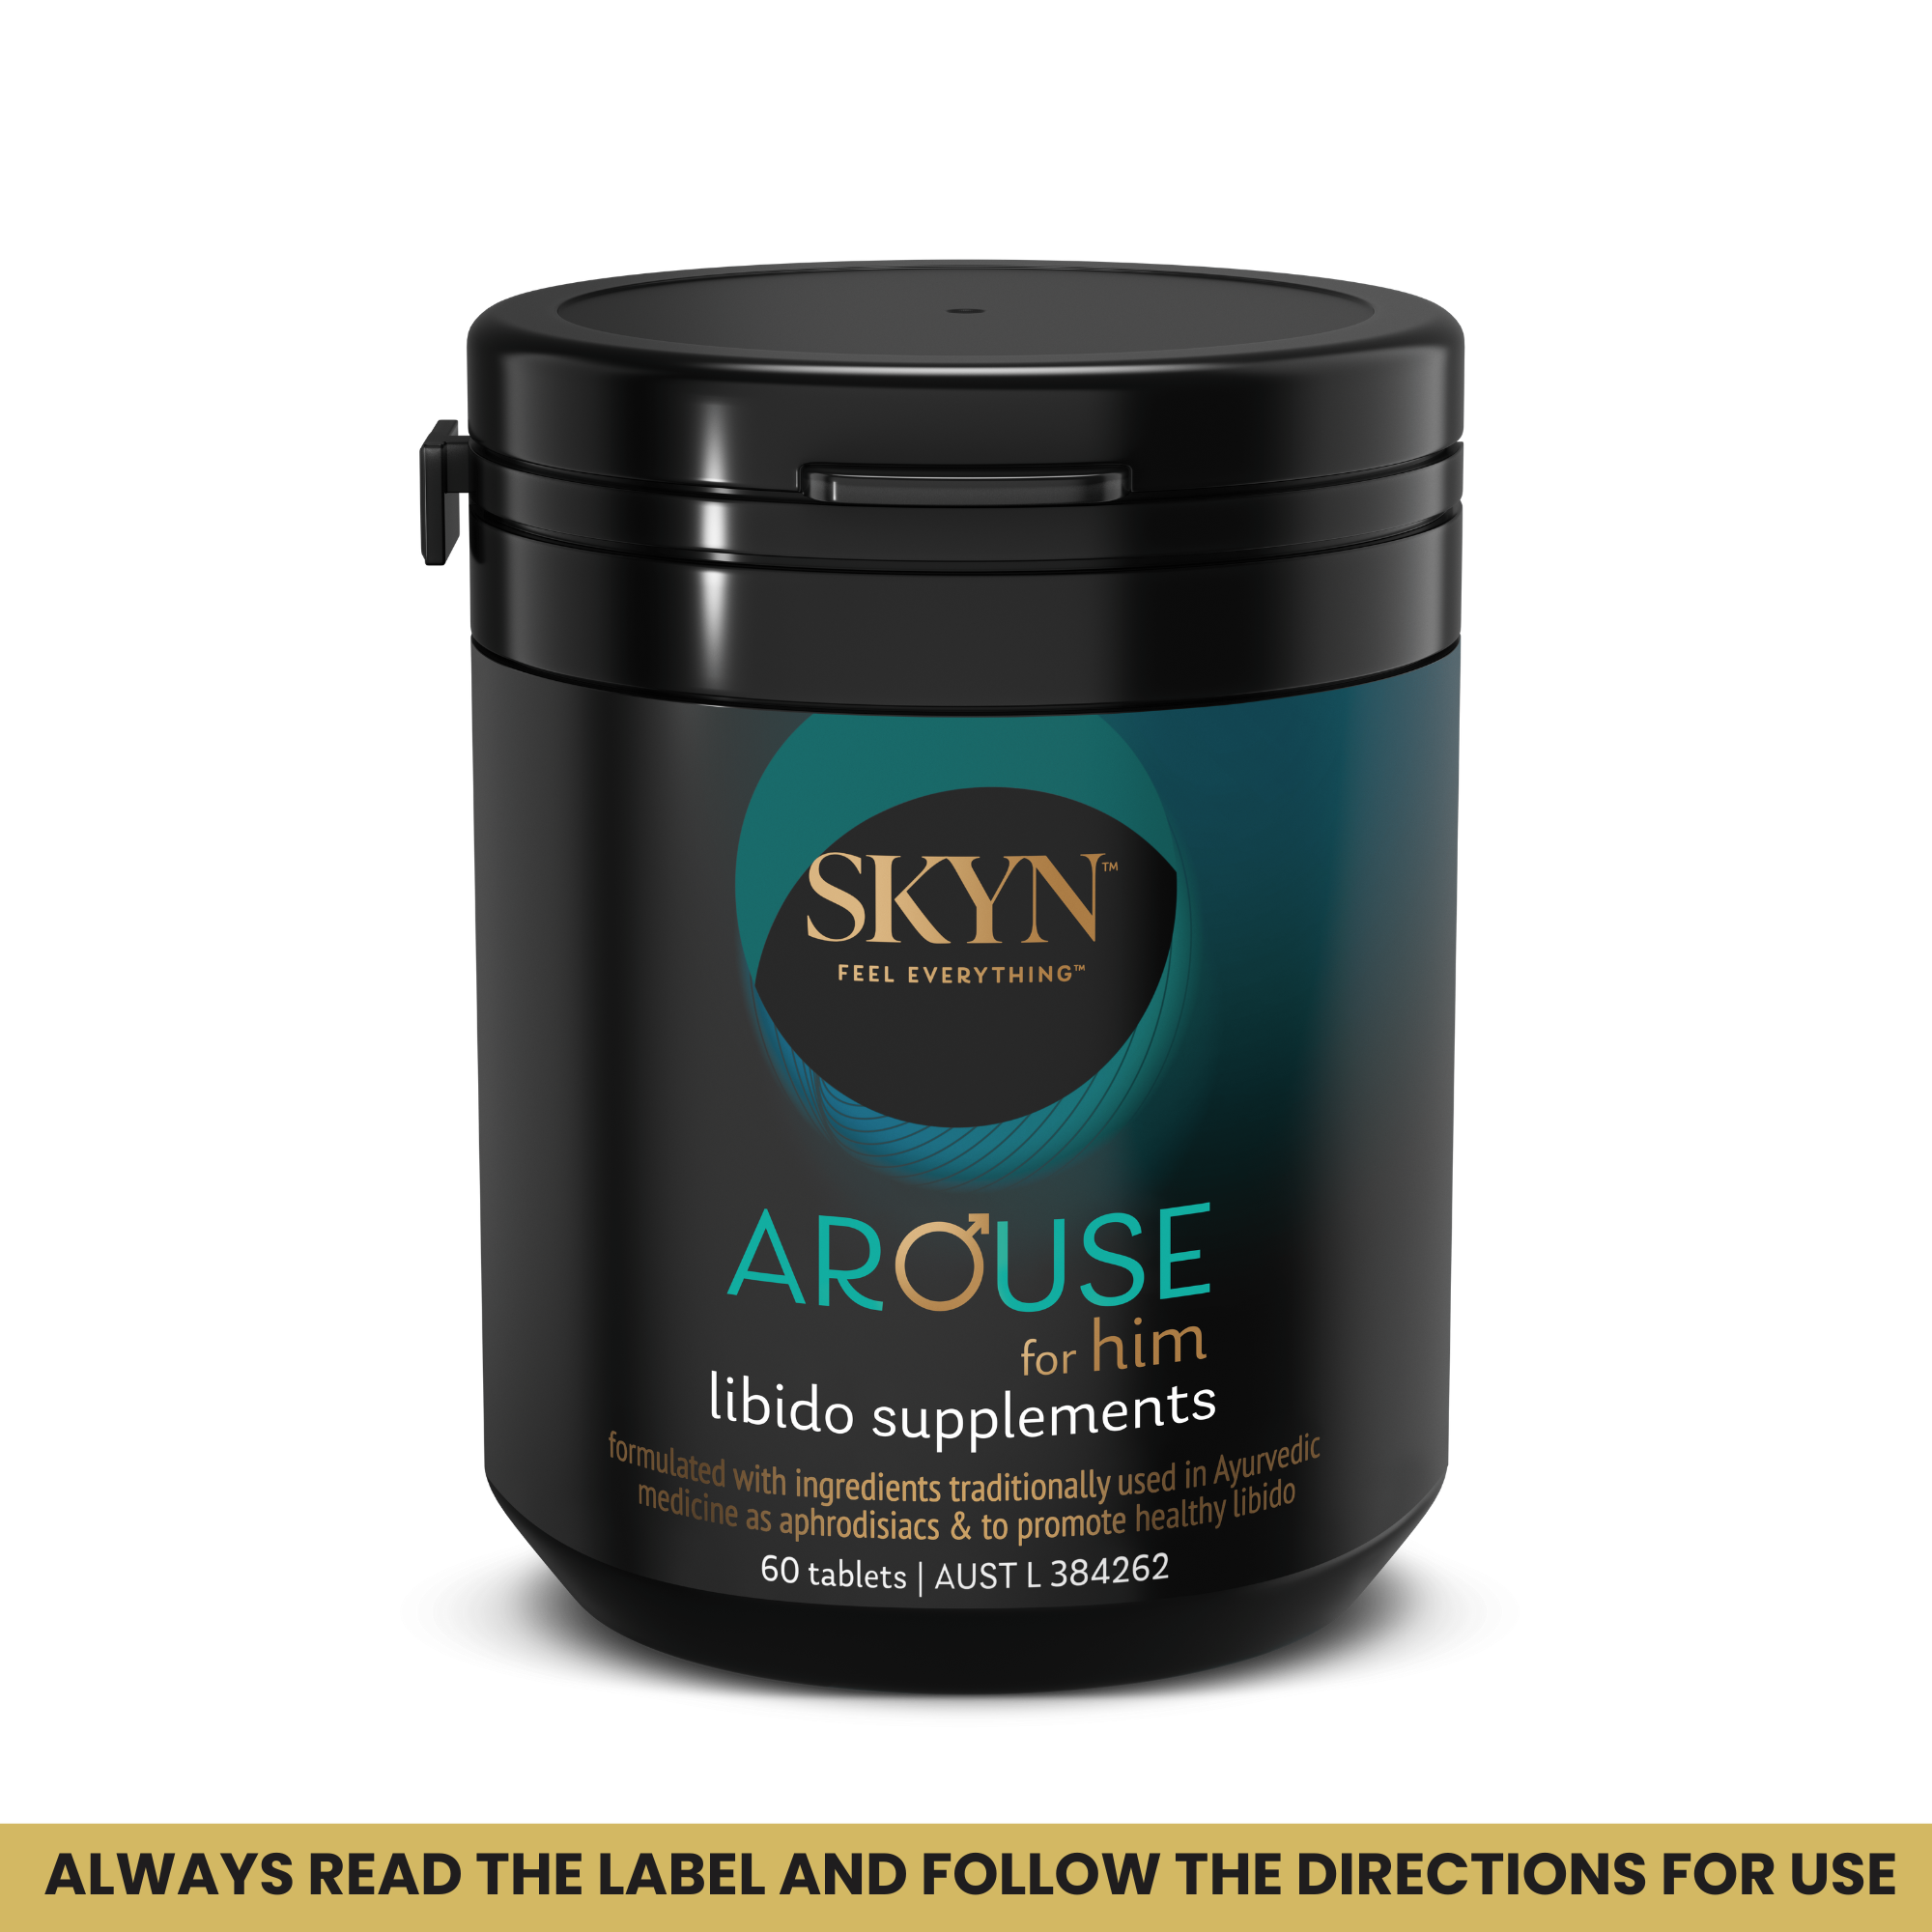 SKYN™ Arouse For Him Libido Supplements